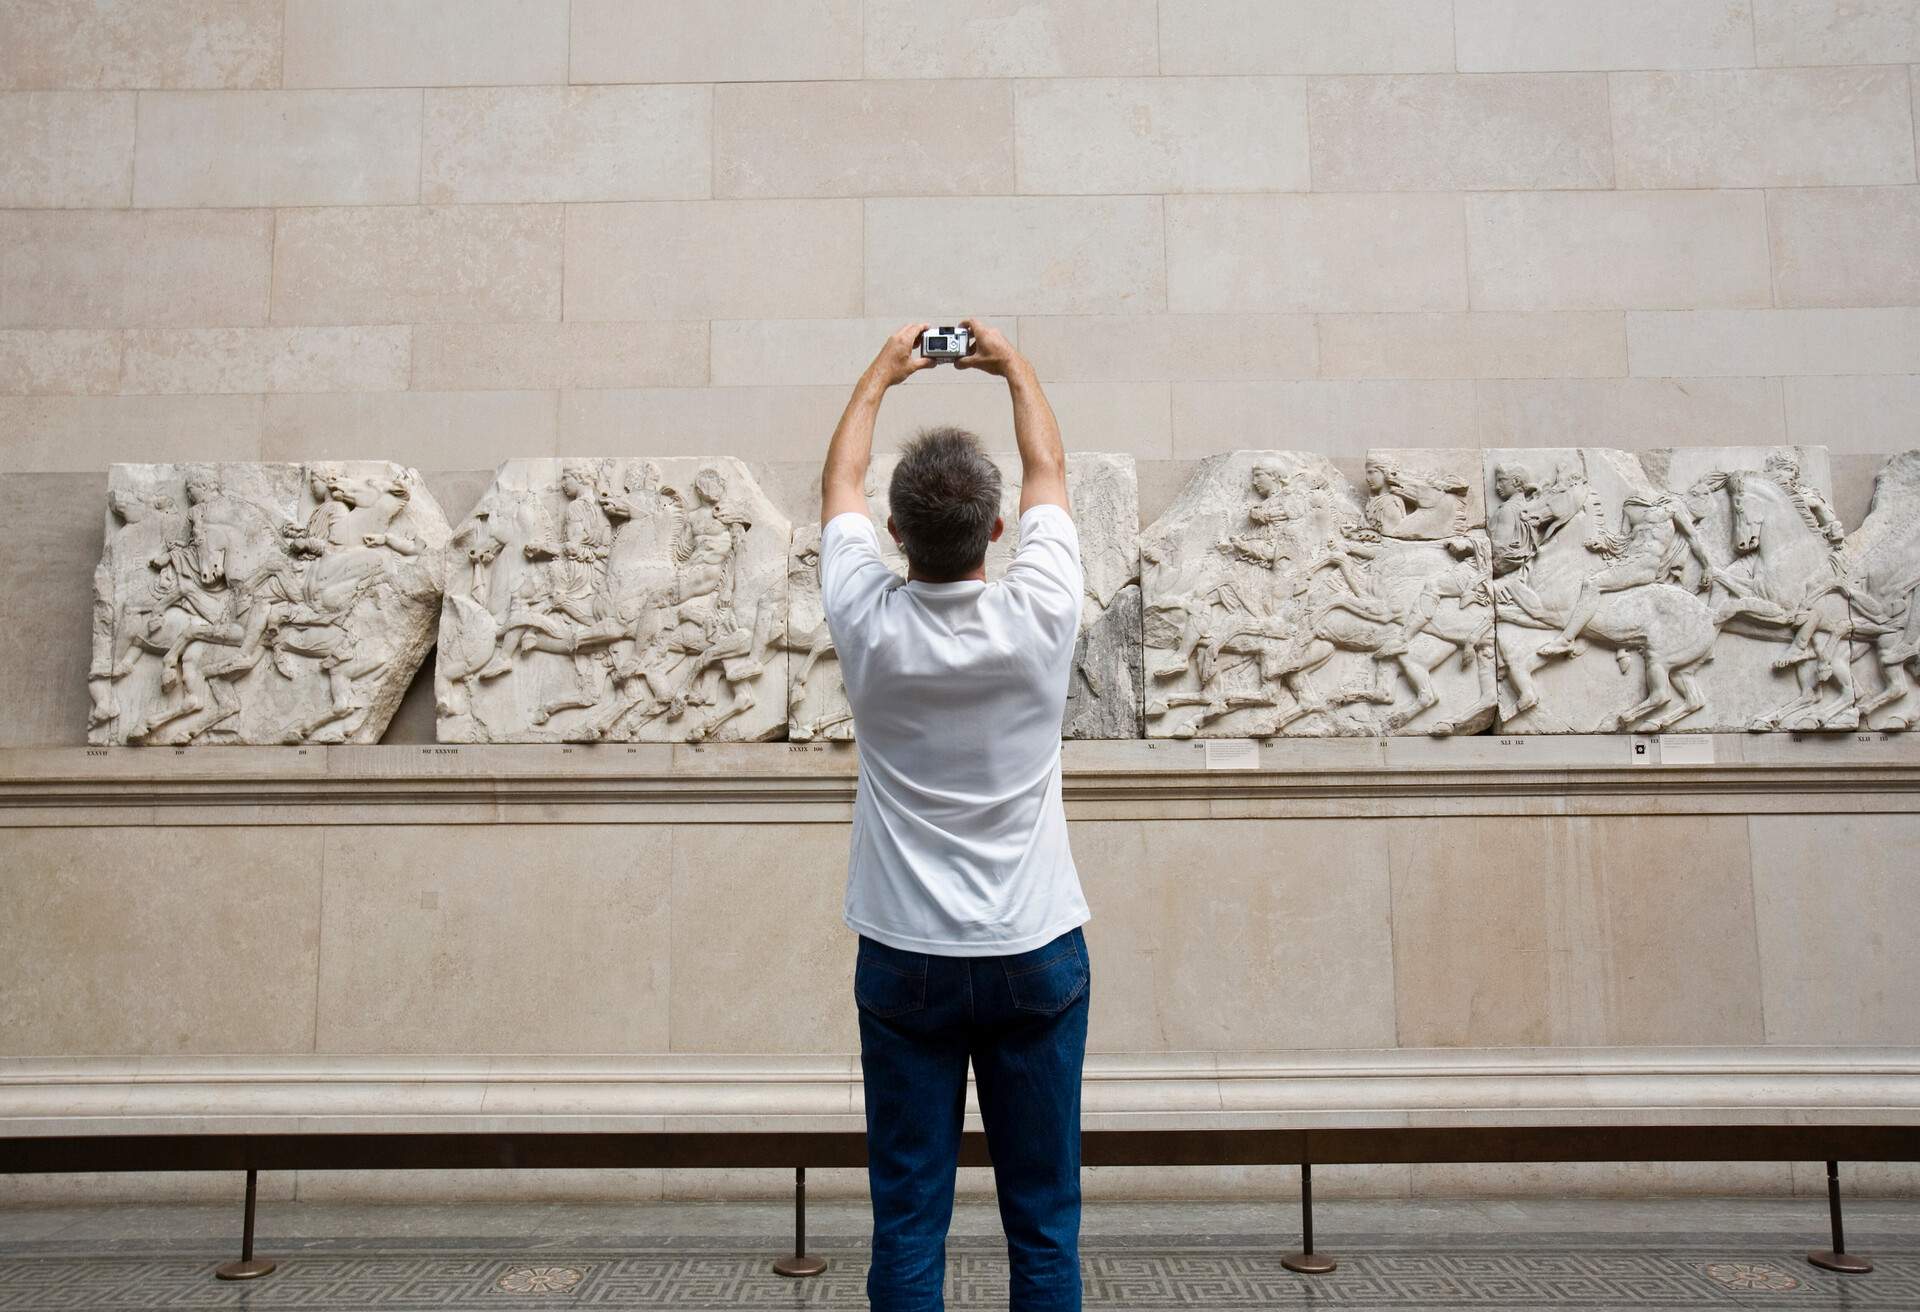 A man in a white shirt taking a photo of the bas-relief sculptures.